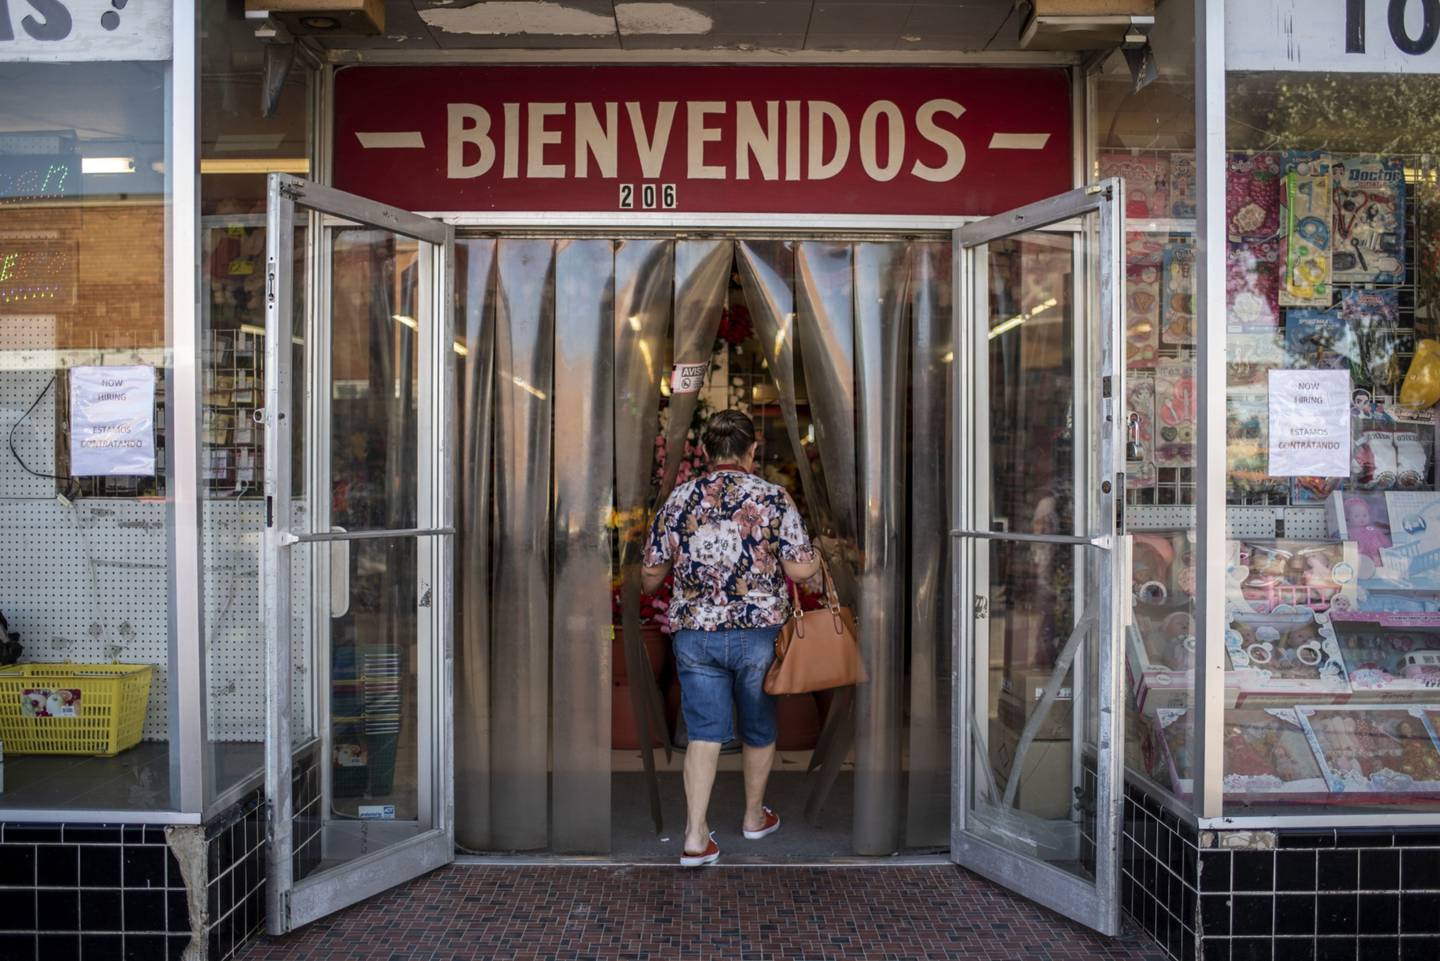 A customer enters a store with a "Welcome" sign in Spanish near the US-Mexico border in Eagle Pass, Texas.